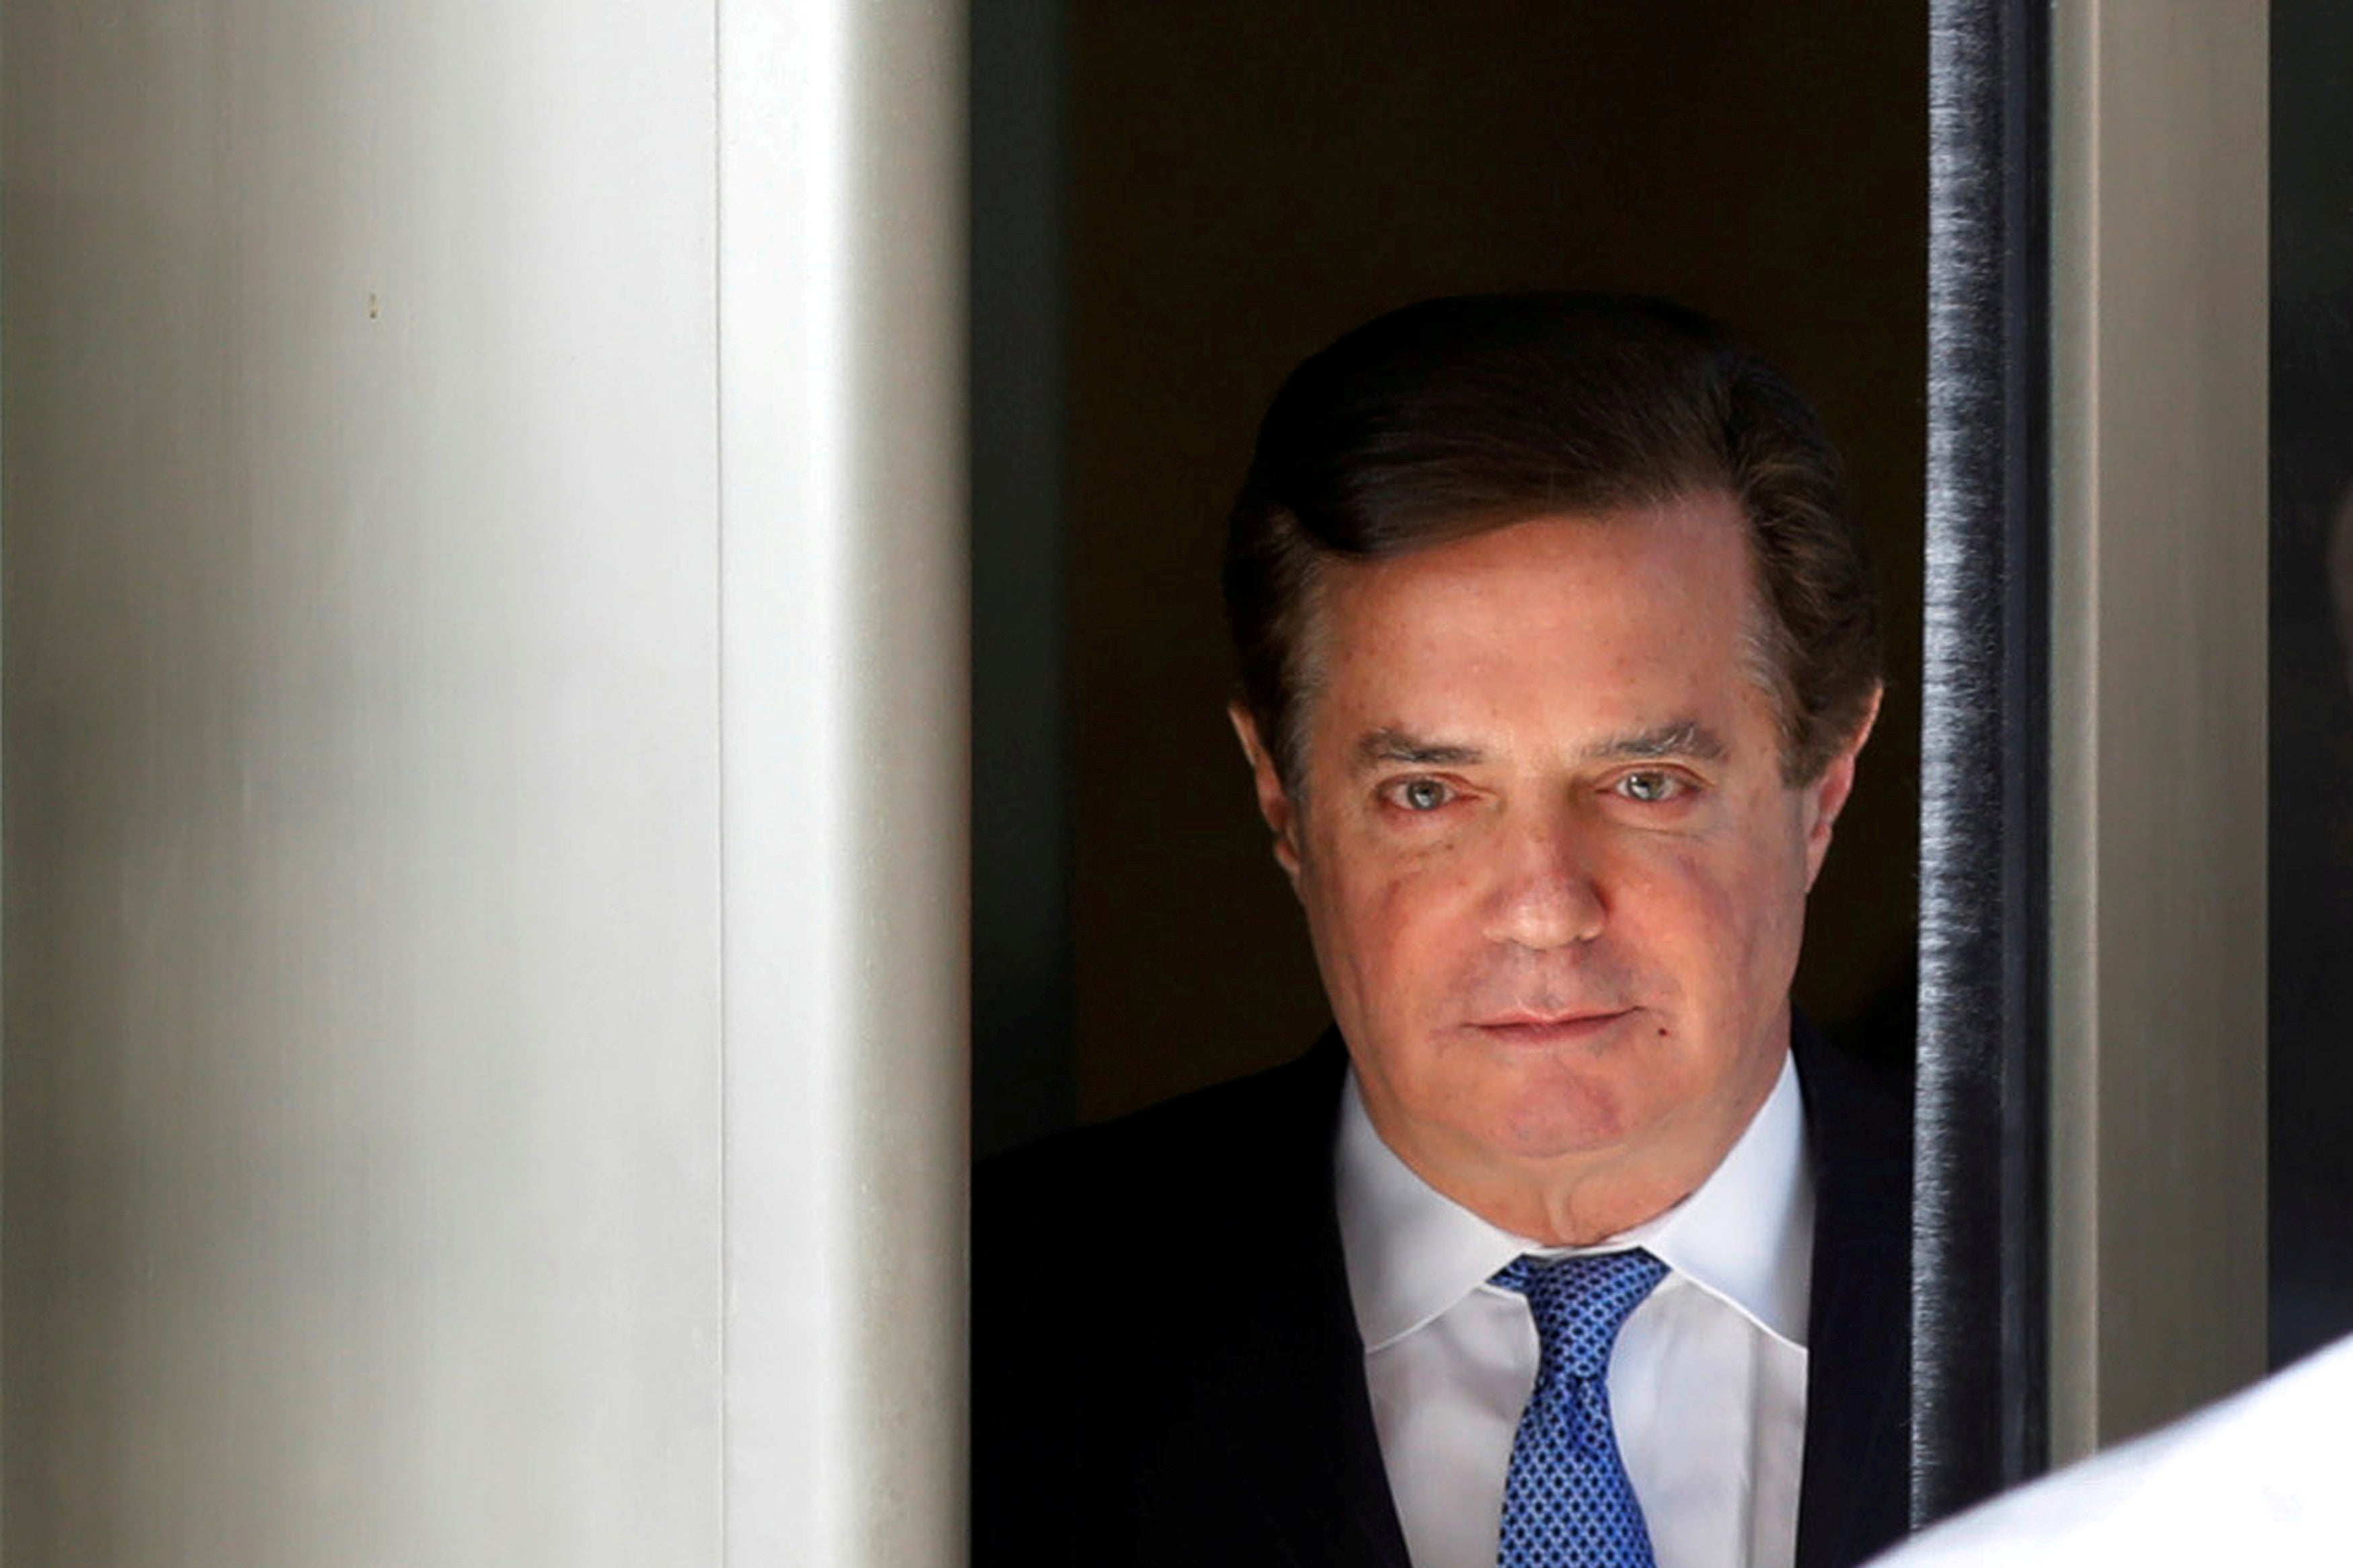 Former Trump campaign manager Paul Manafort departs from U.S. District Court in Washington, U.S., Feb. 28, 2018. 